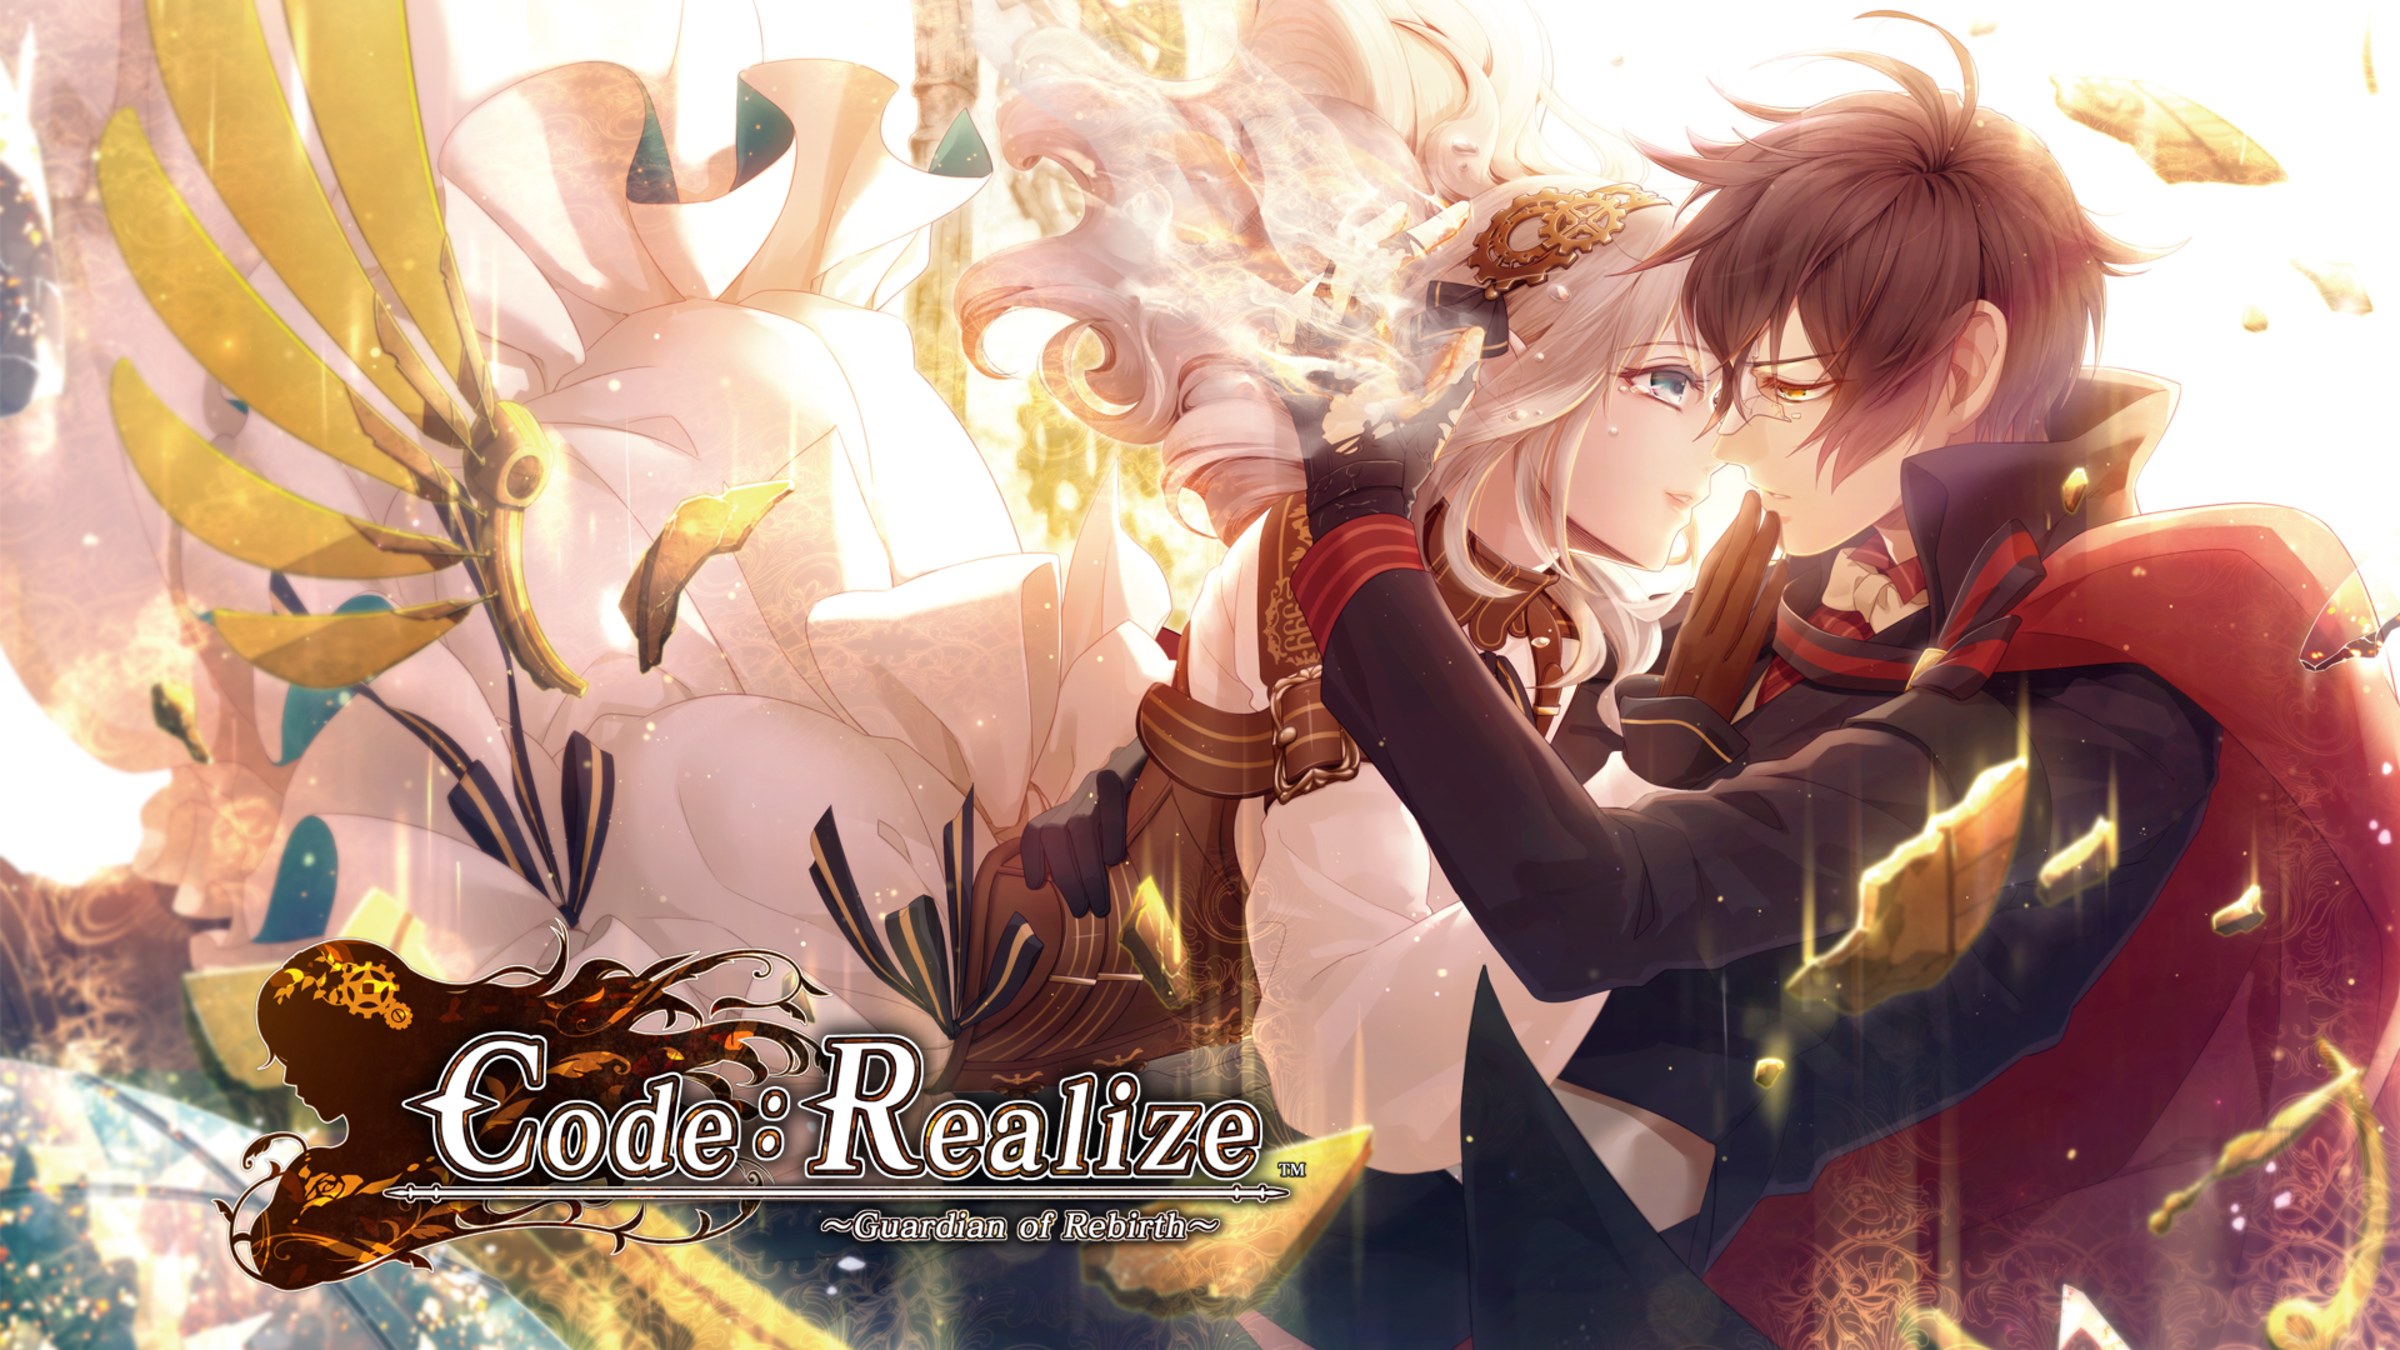 Code: Realize ~Guardian of Rebirth~ for Nintendo - Nintendo Official Site